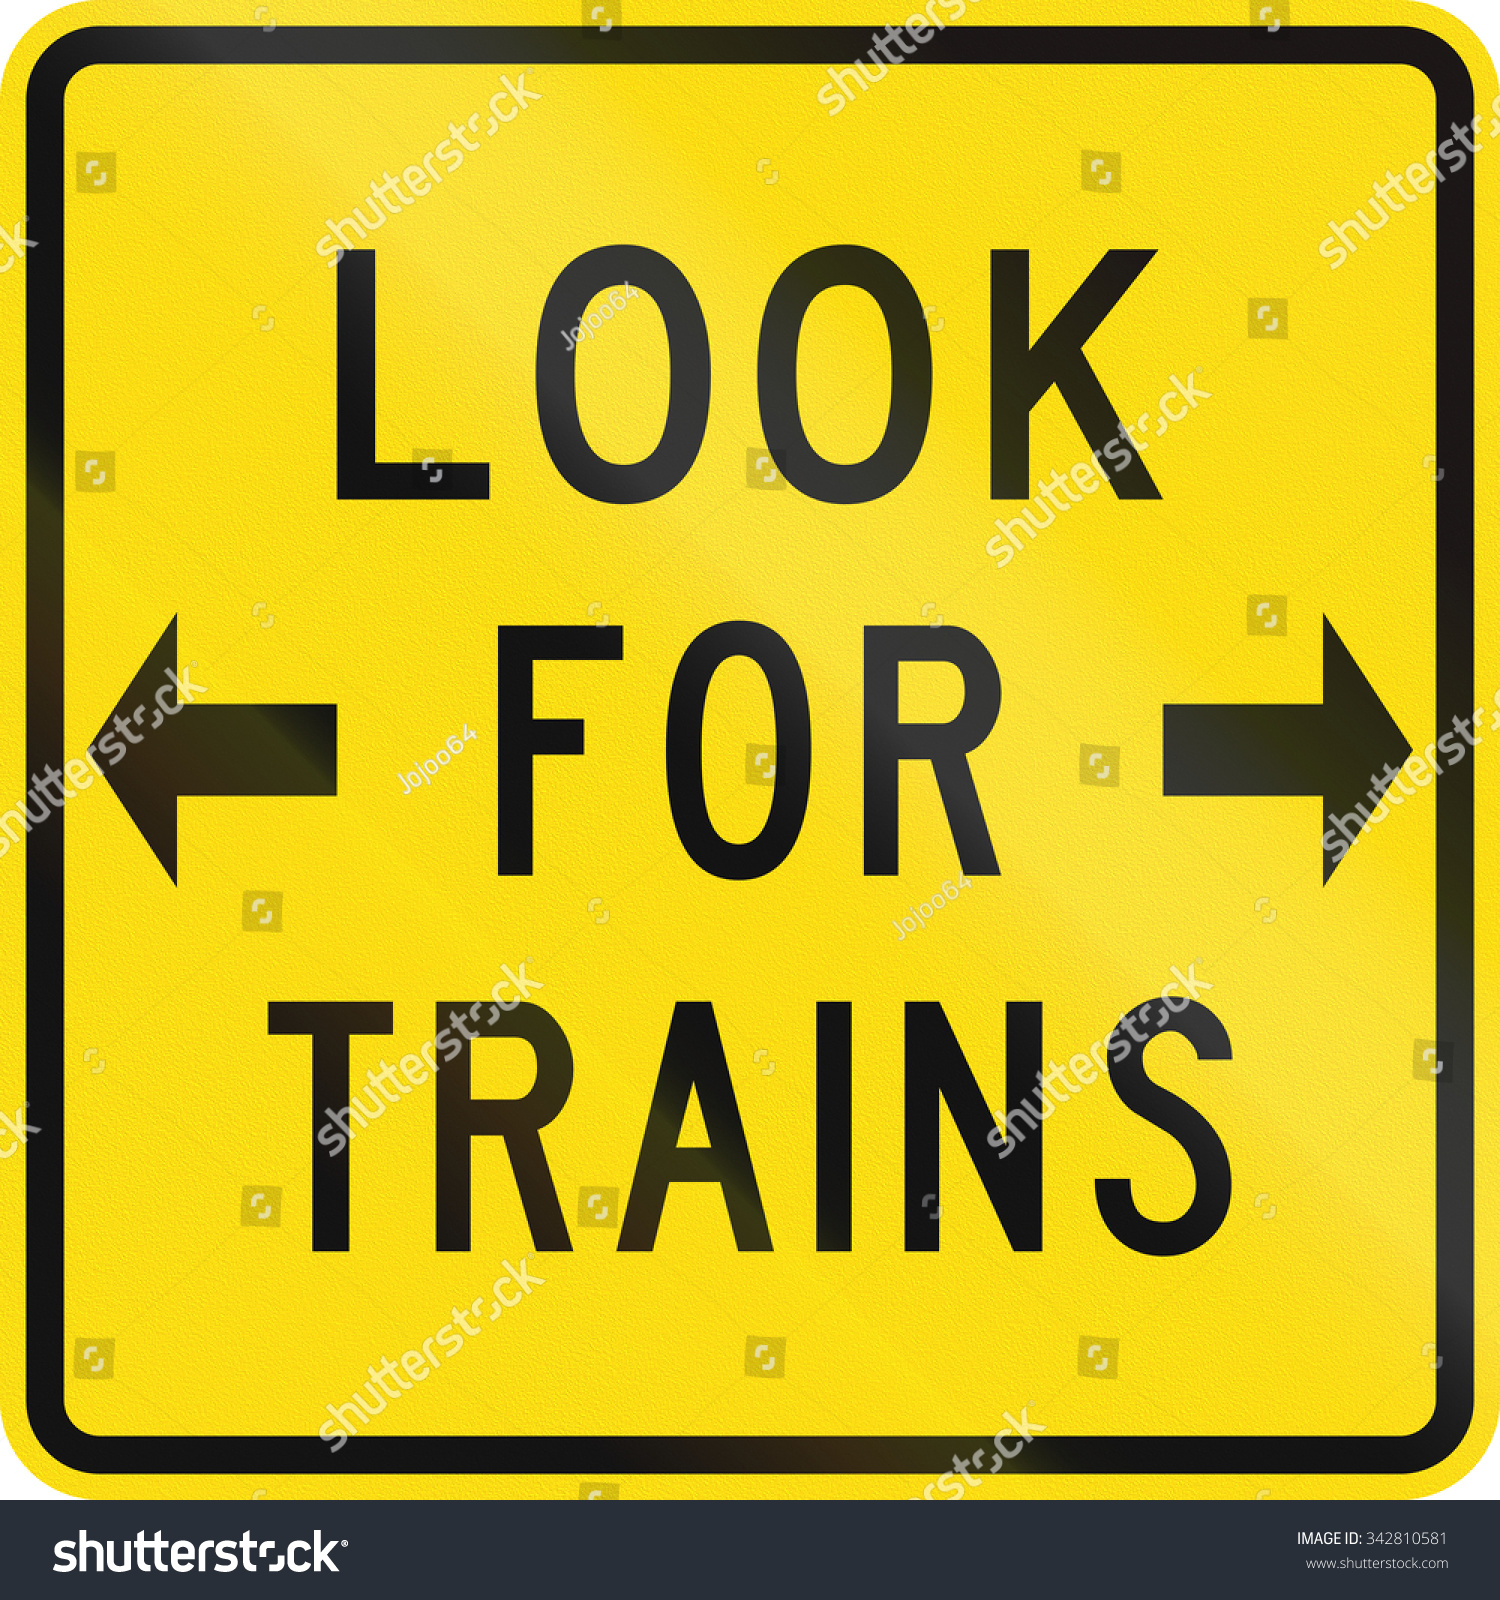 New Zealand Road Sign Look Trains Stock Illustration 342810581 ...